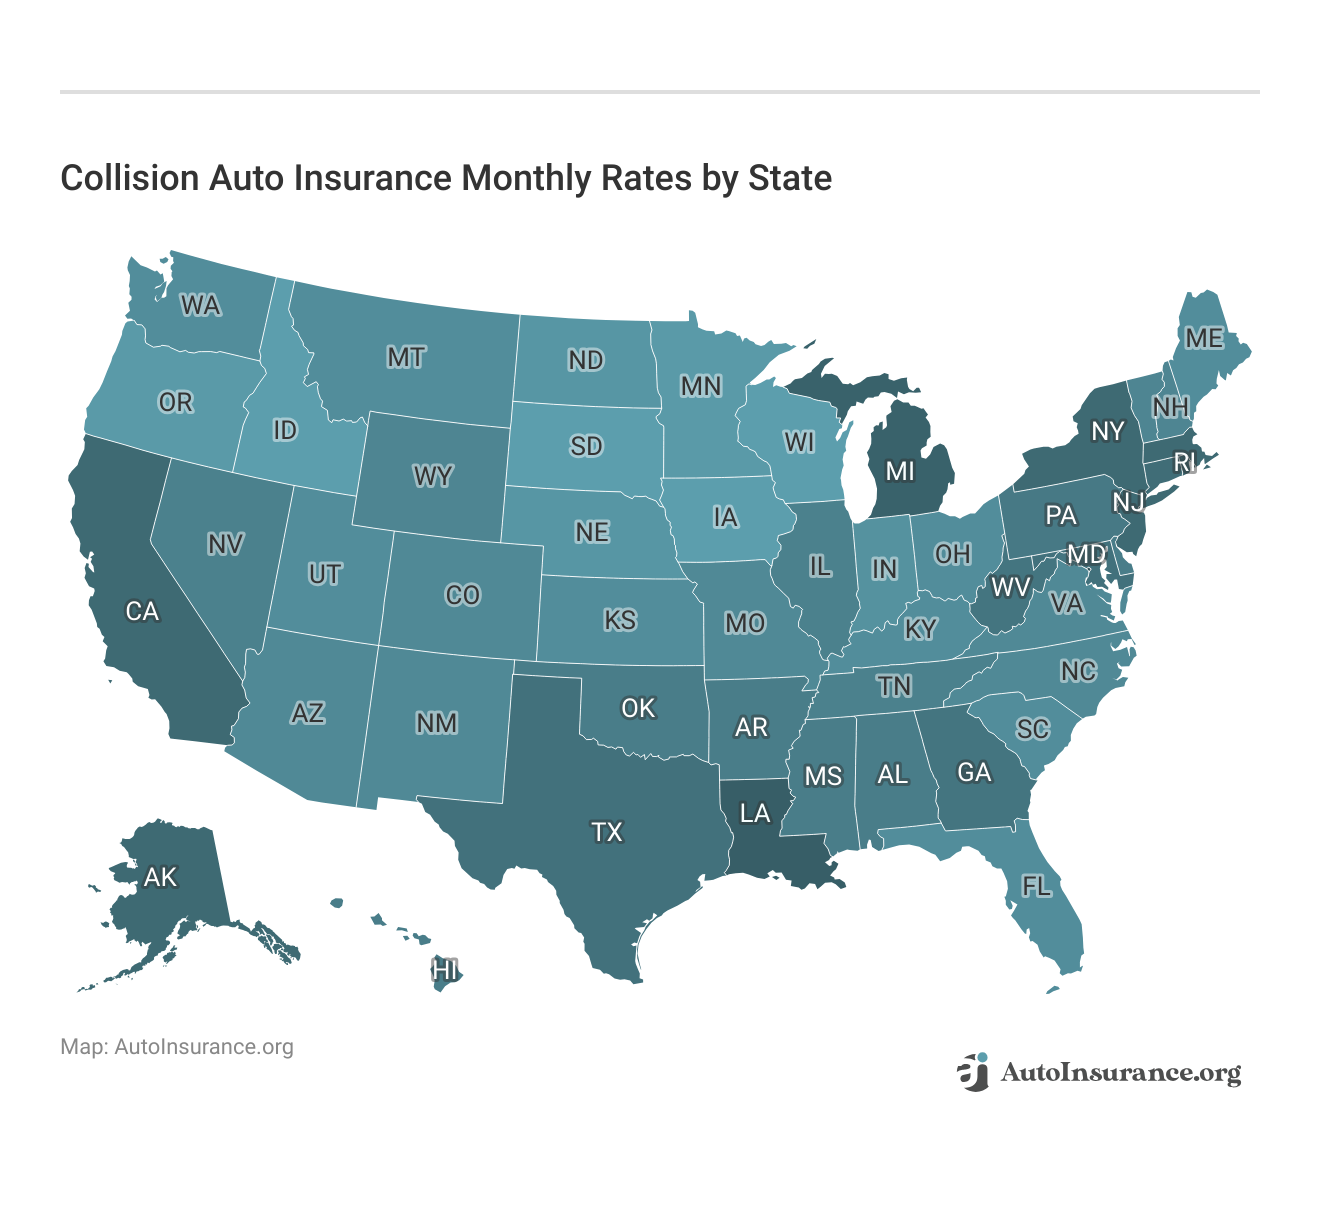 <h3>Collision Auto Insurance Monthly Rates by State</h3>